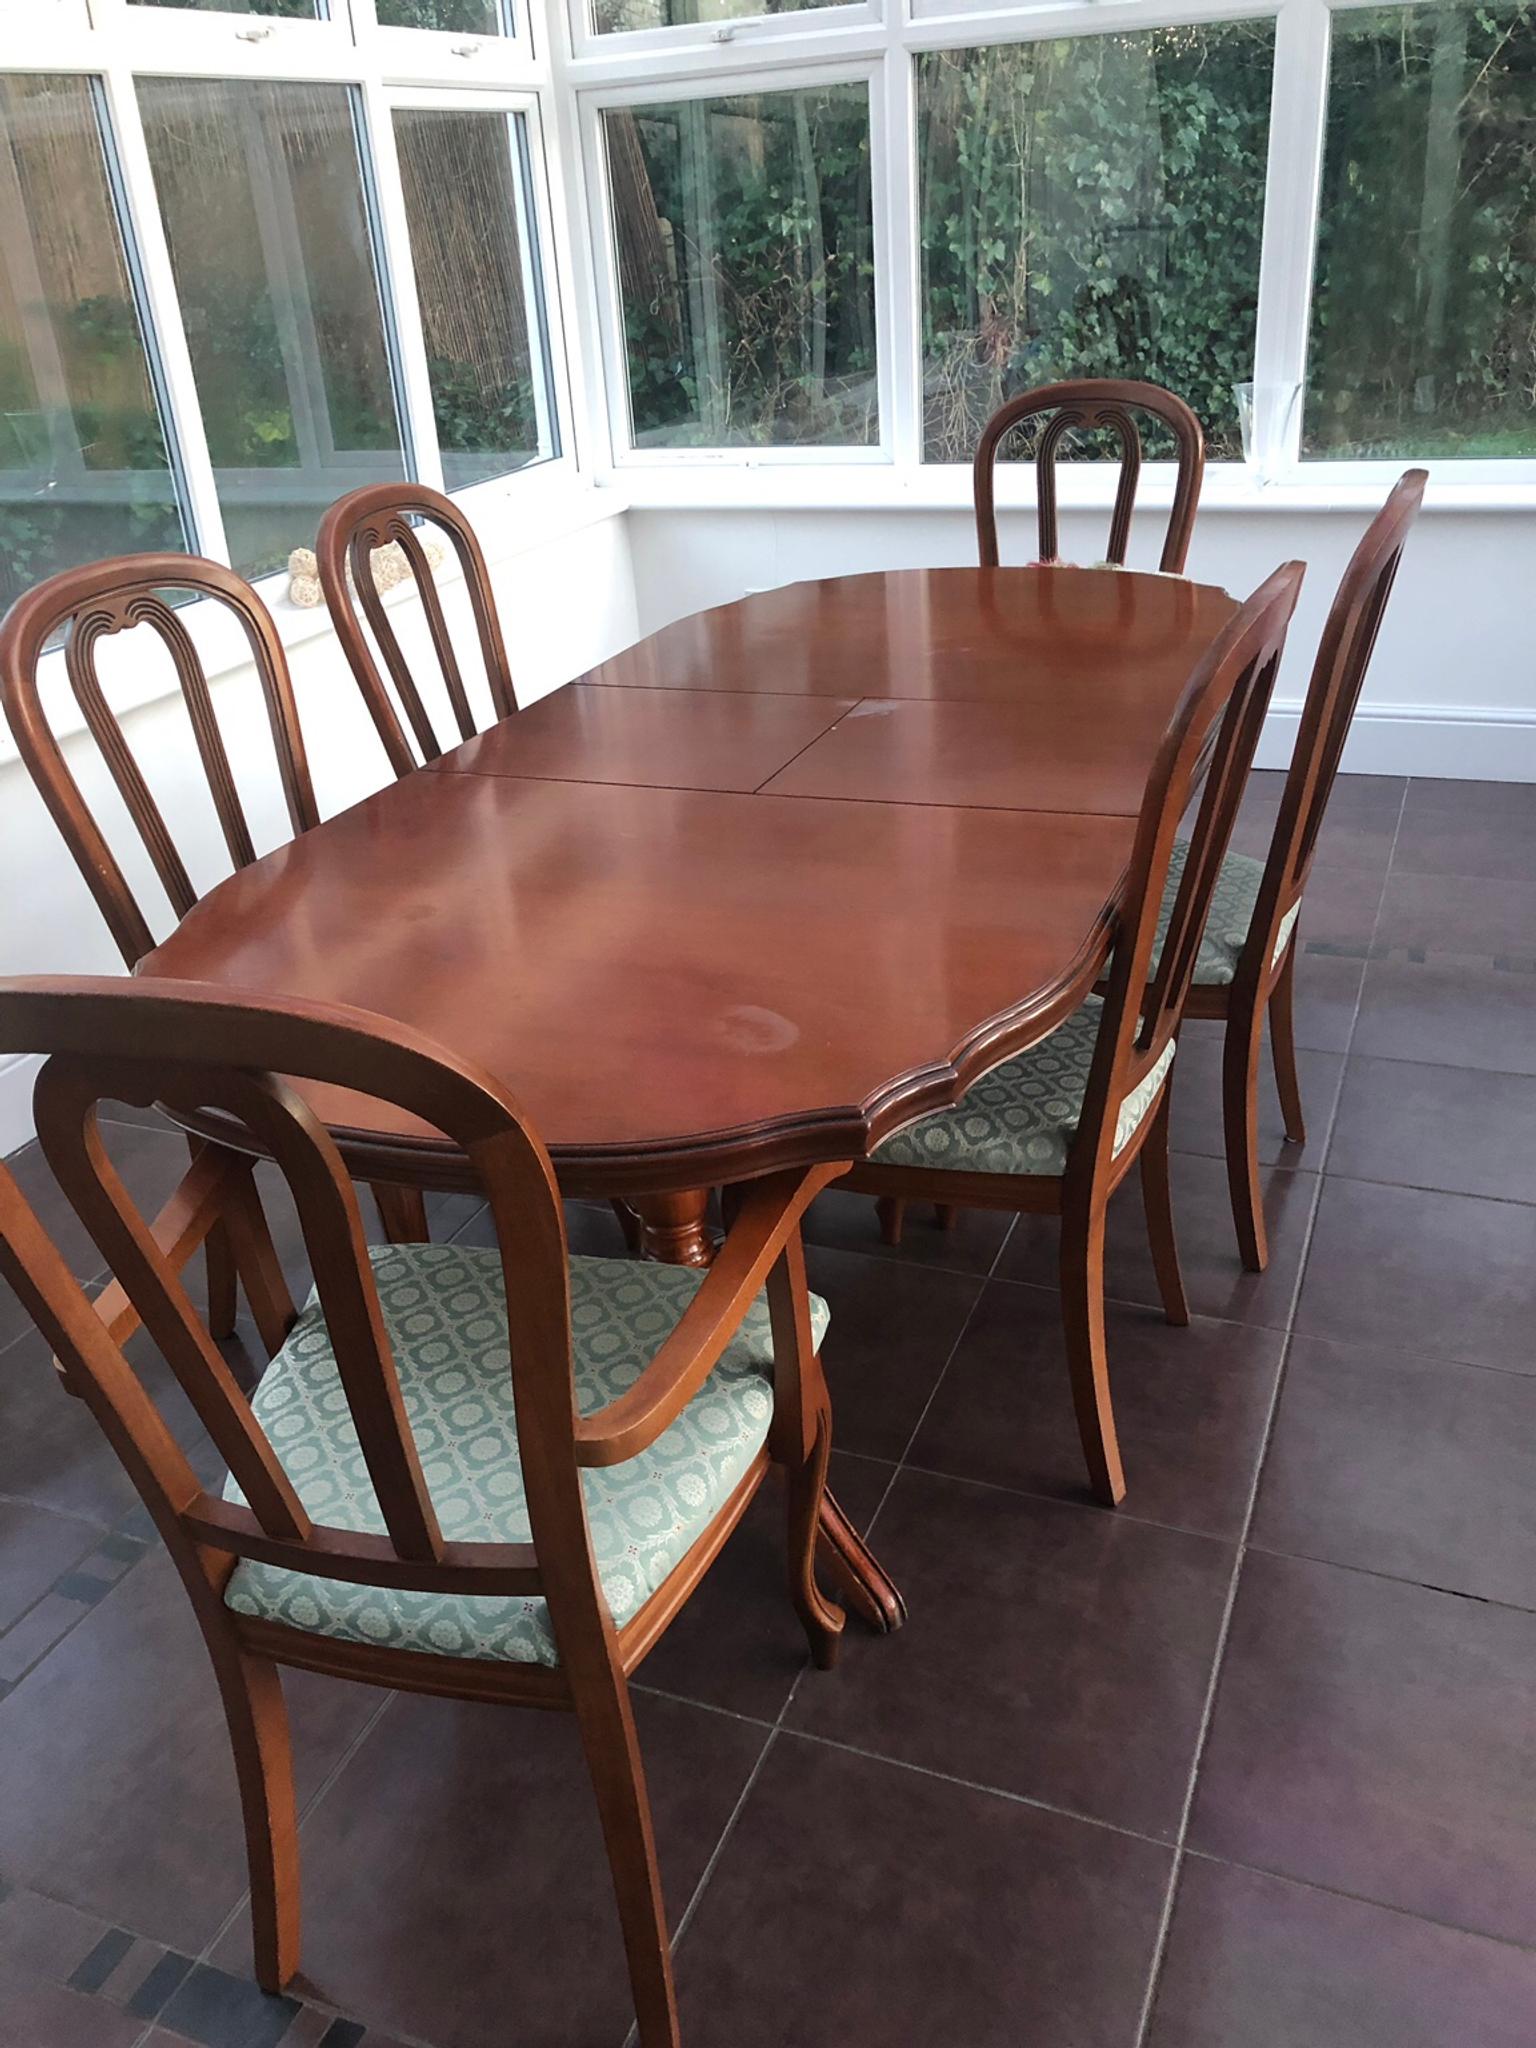 6 Seater Extendable Dining Table Chairs In Da1 Dartford For 170 00 For Sale Shpock